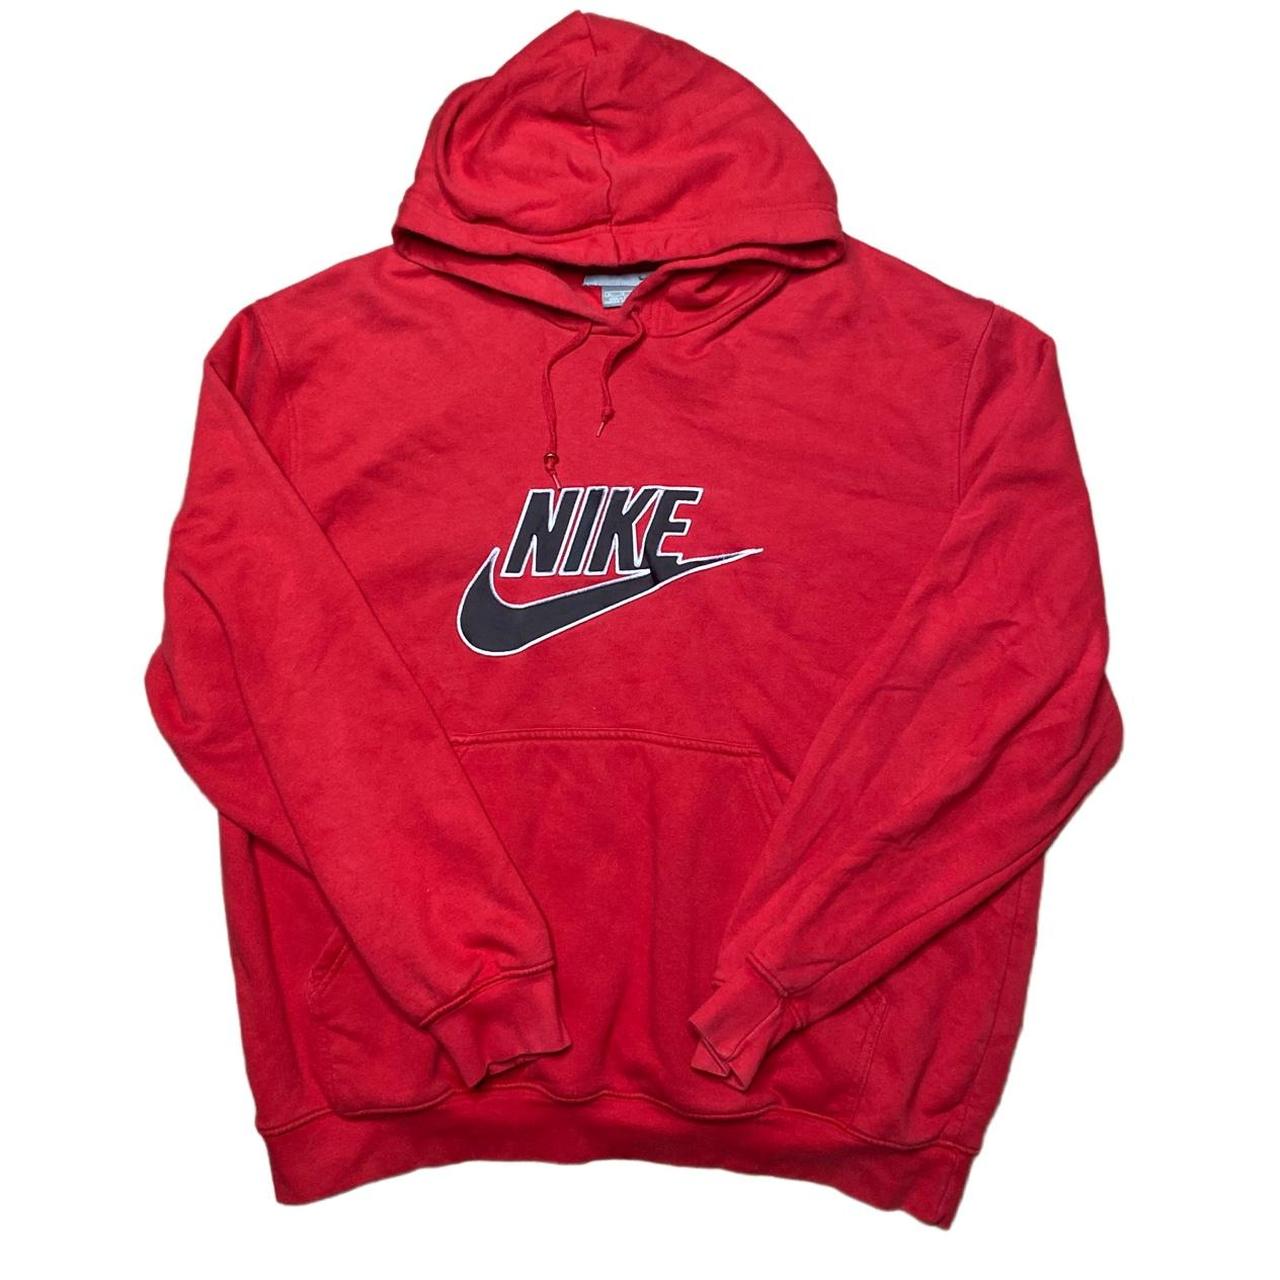 2000s Nike Red Big Spellout Hoodie #nike #spellout... - Depop